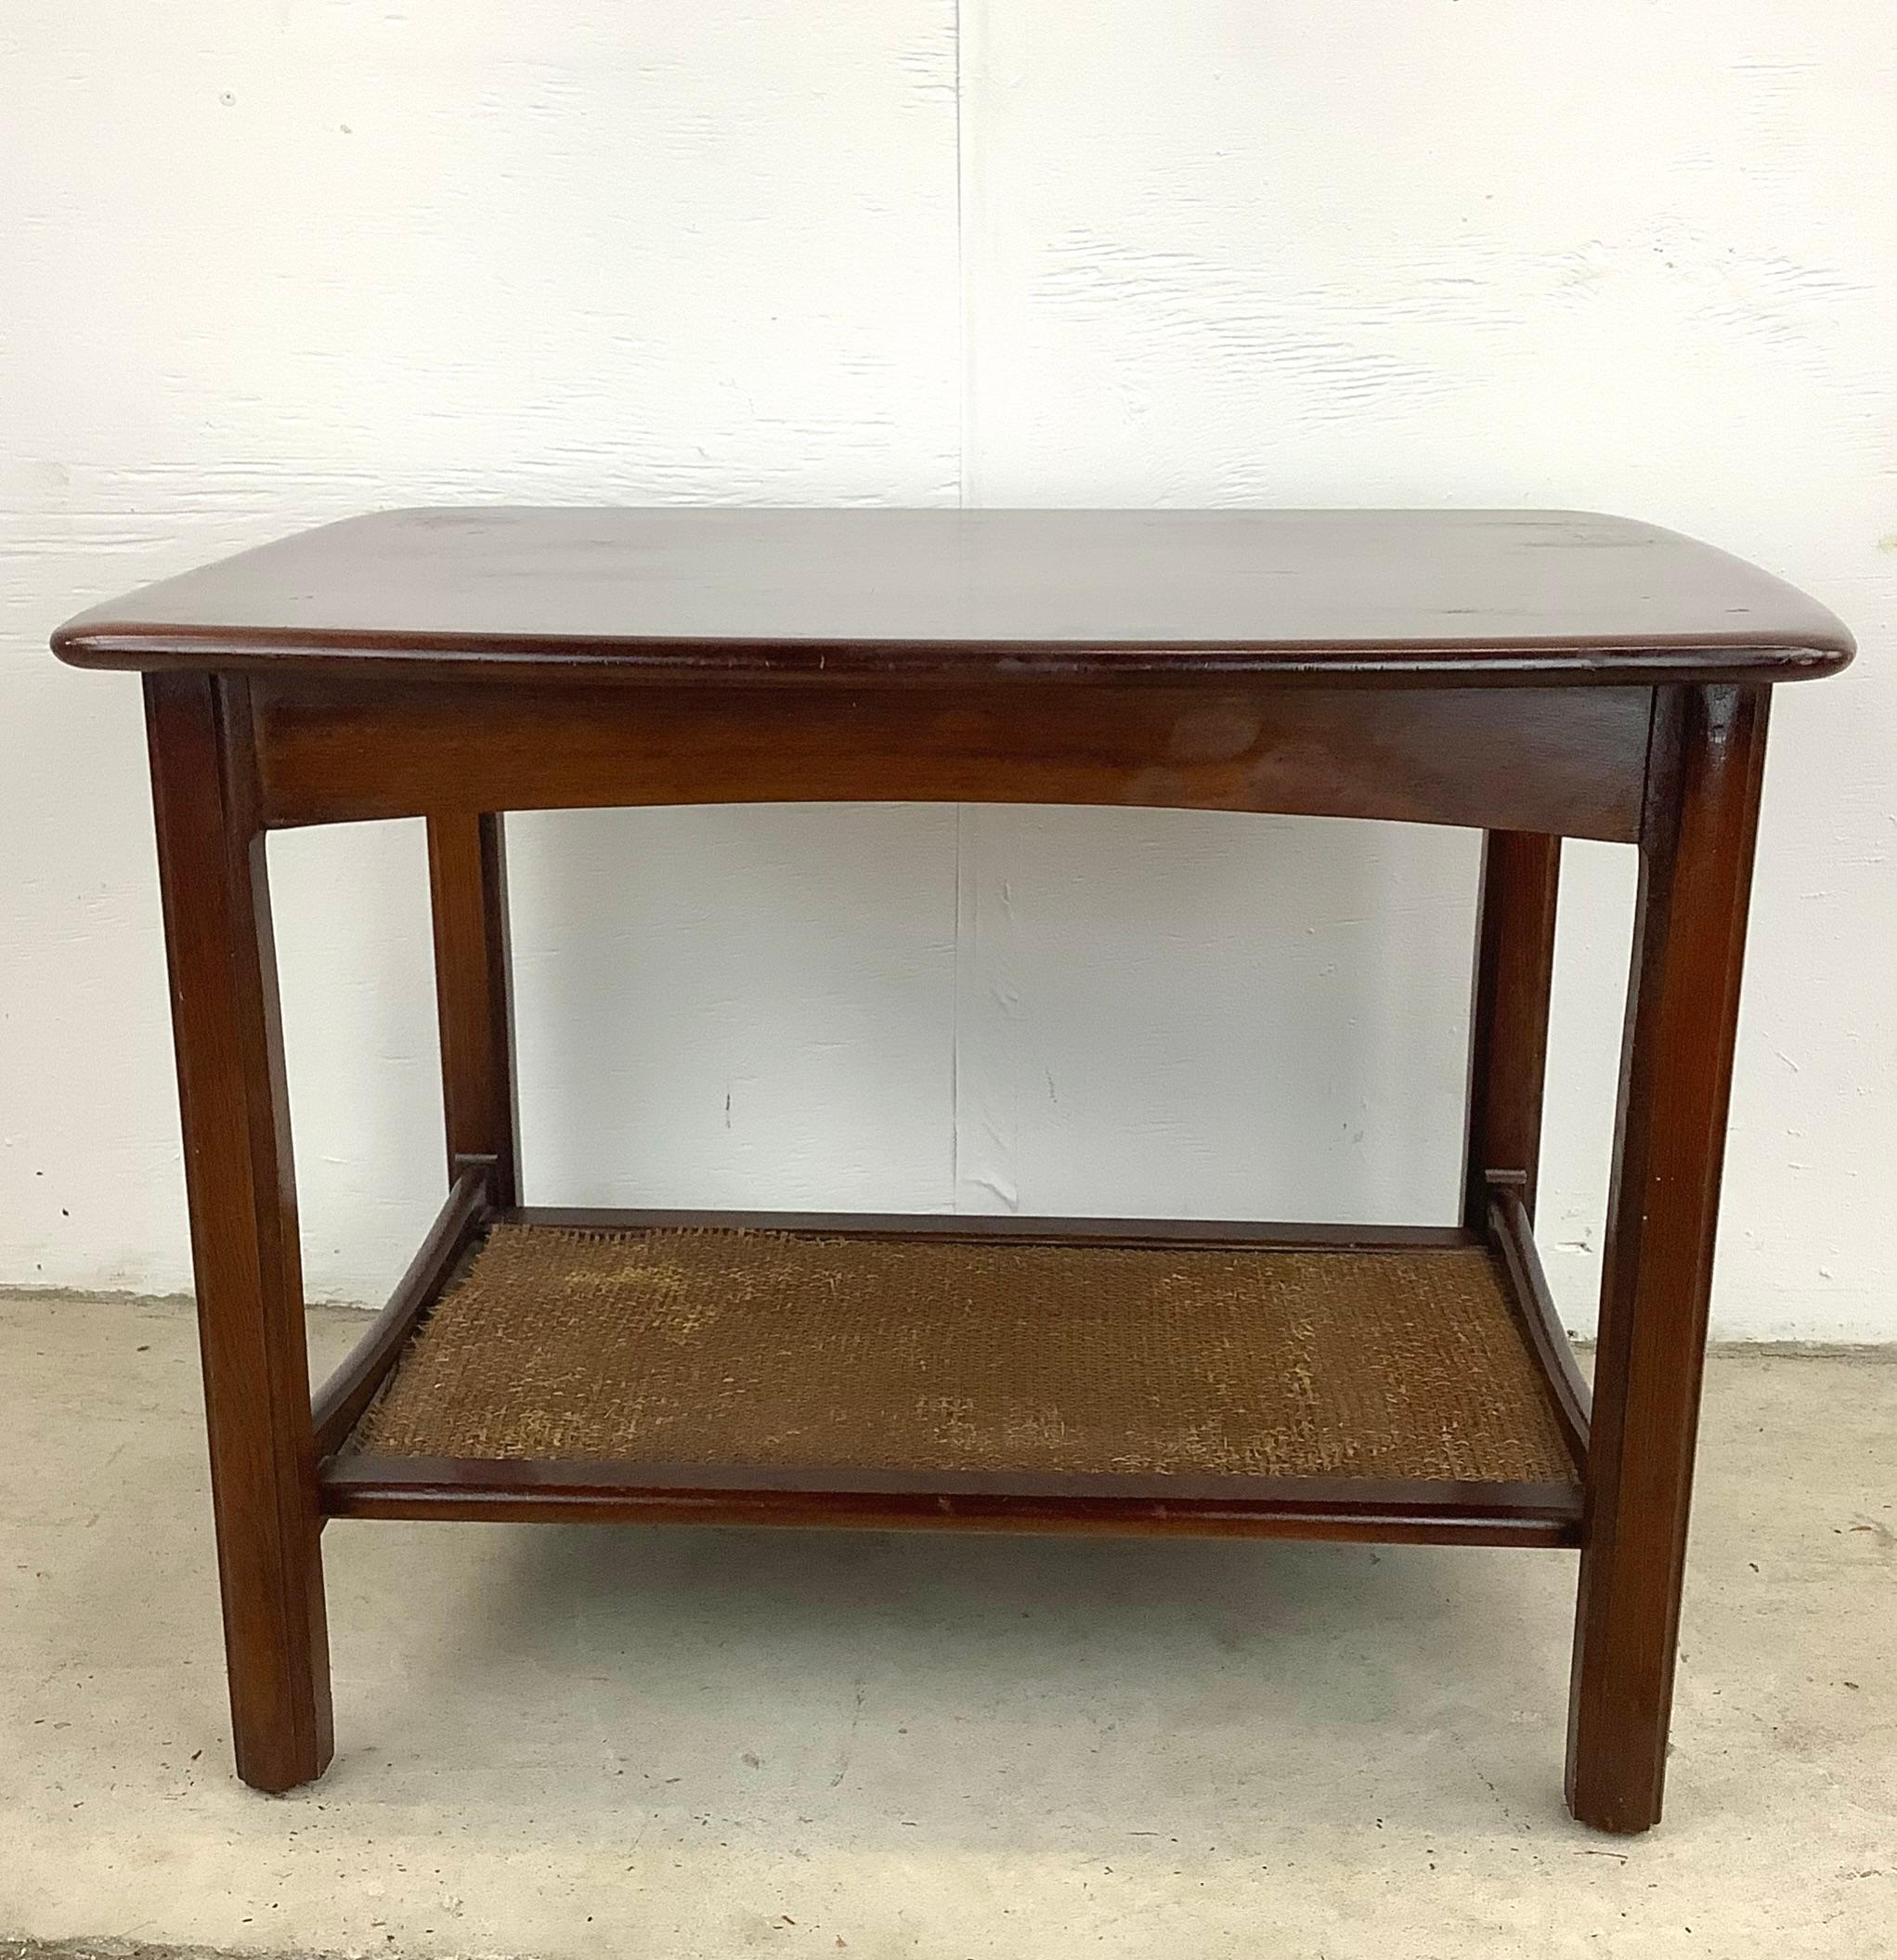 This simple yet striking mid-century side table seamlessly combines style, functionality, and a touch of vintage charm. The perfect lamp table or end table for any living space, this two tier table adds a touch of sophistication and practicality.